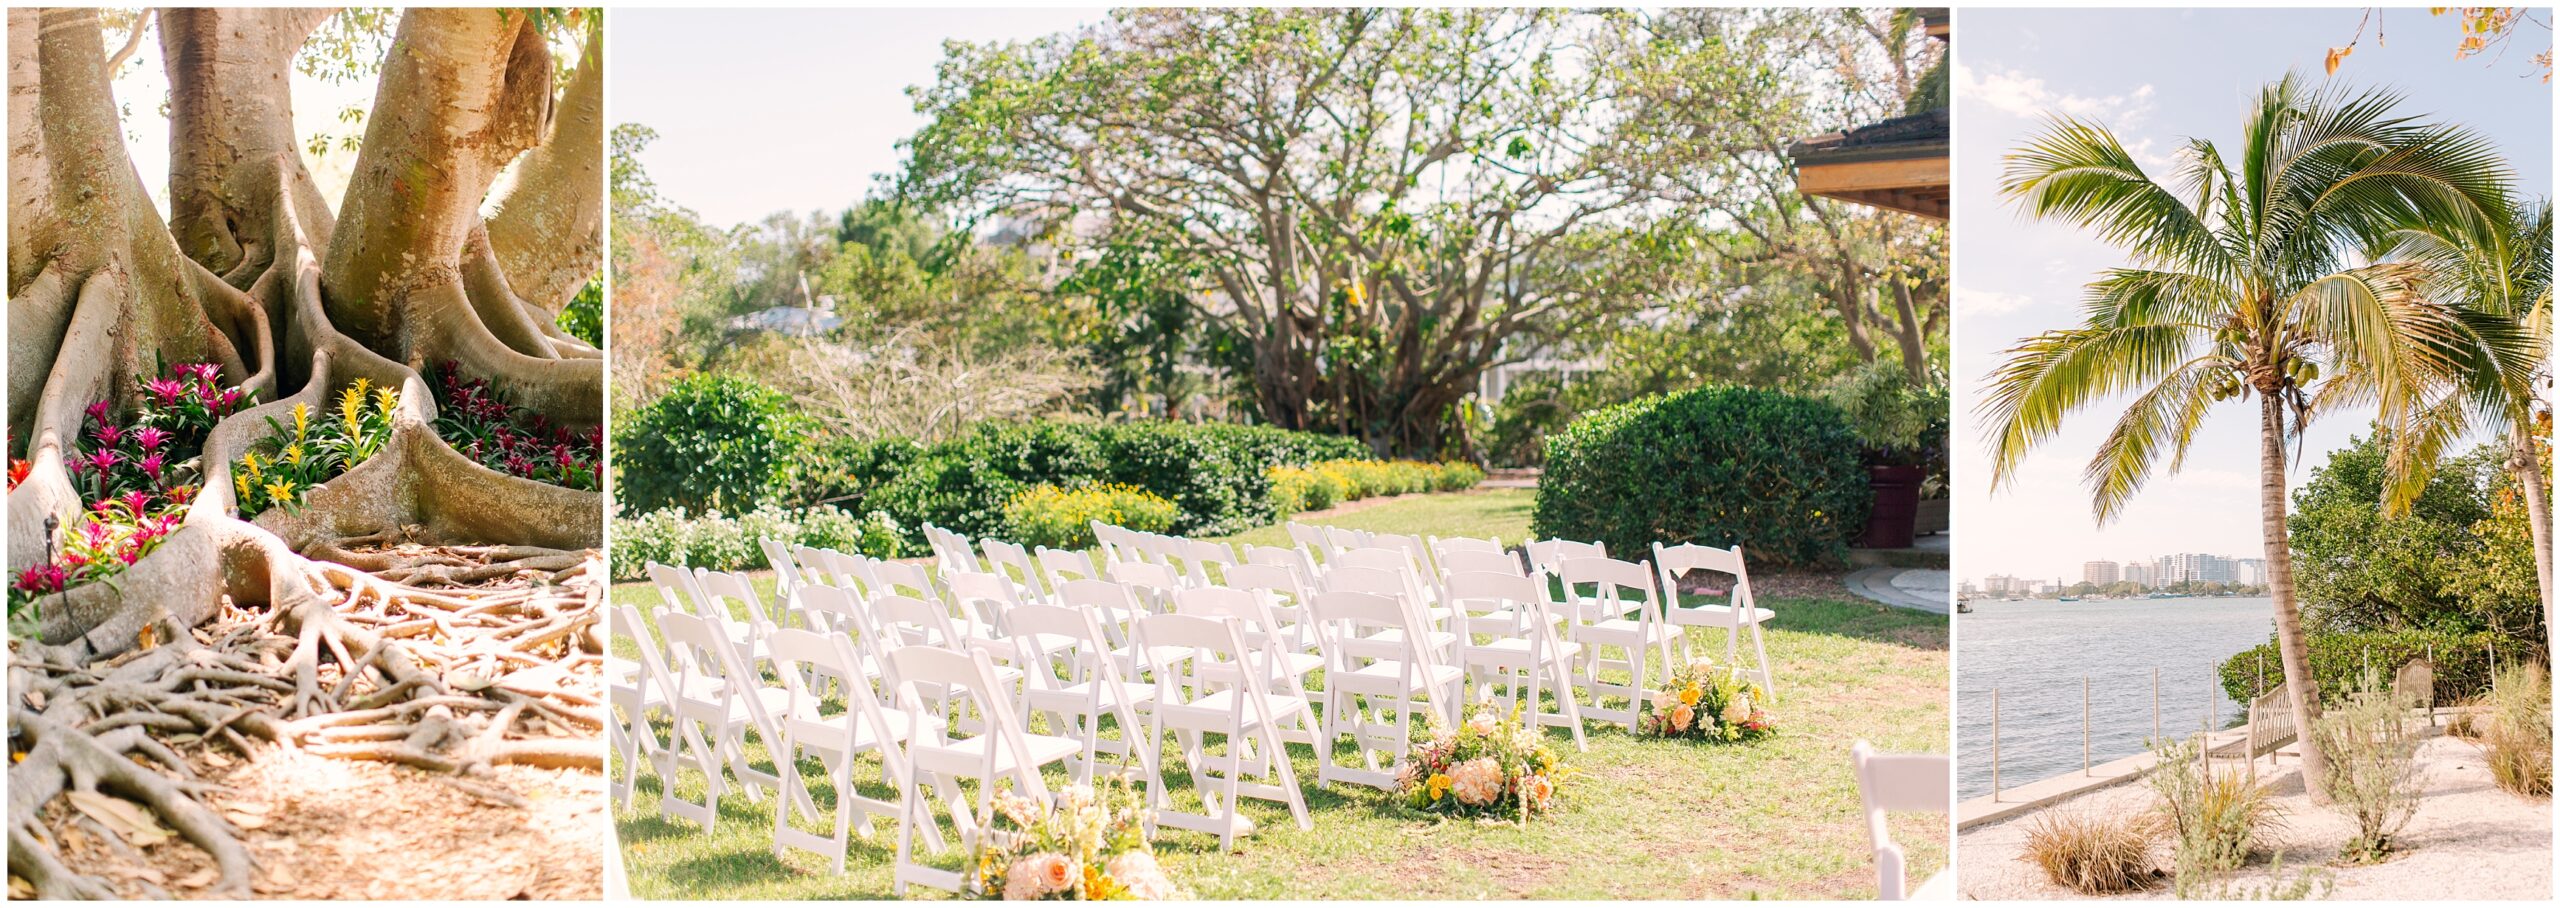 a collage of three photos of a garden wedding, first of a tree with flowers planted along the above ground roots, middle photo of a display of ceremony chairs set up on a garden lawn, and third photo of a palm tree in a beach setting. 